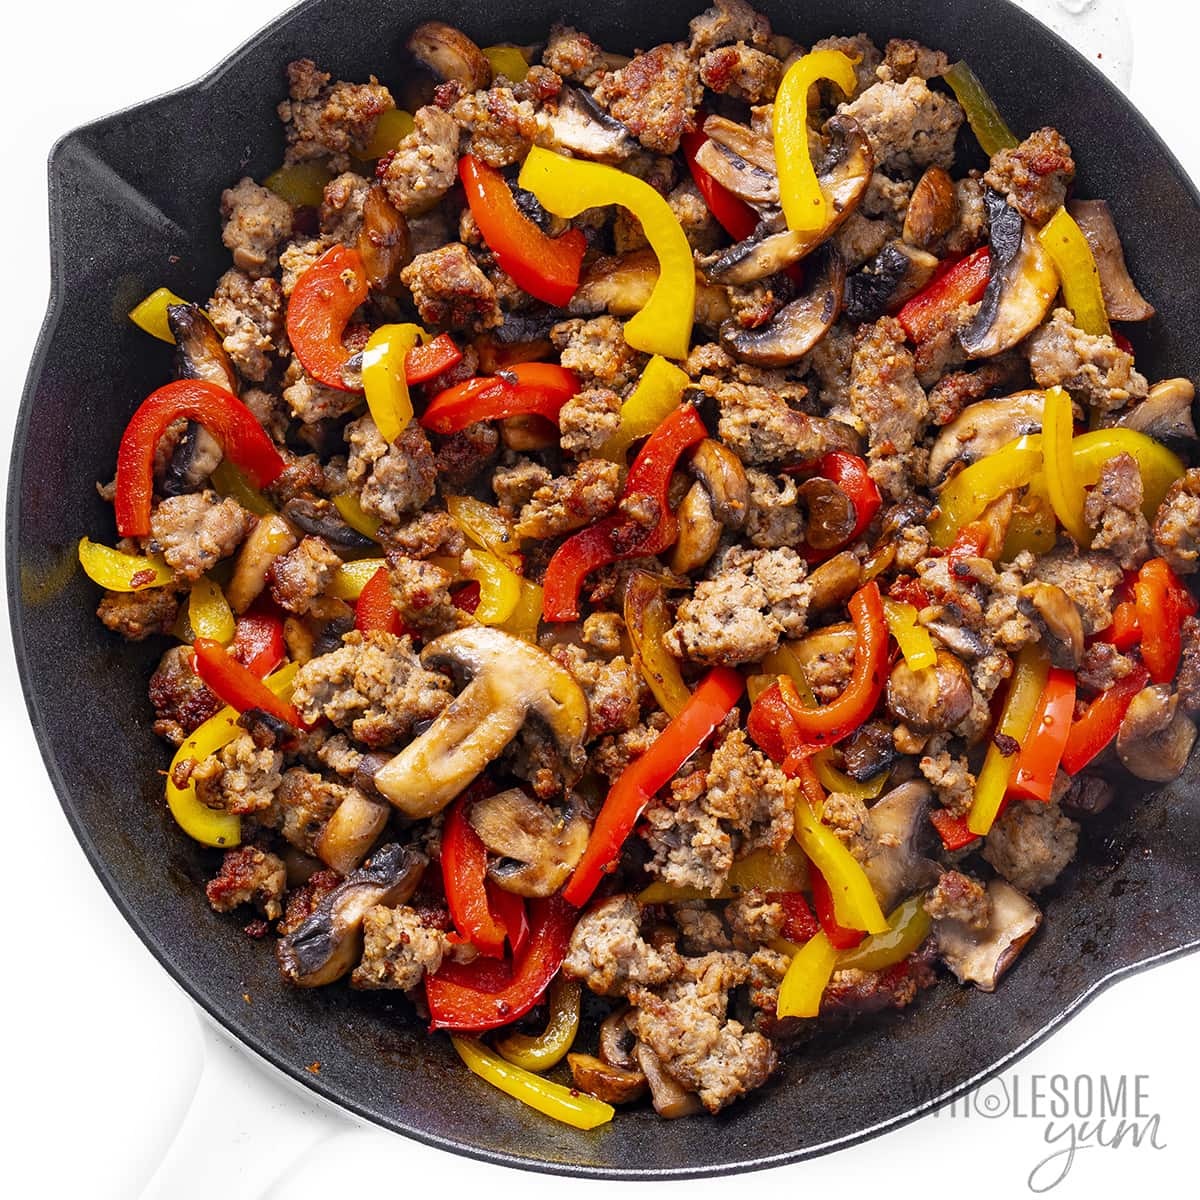 Sauteed veggies and sausage in a skillet.